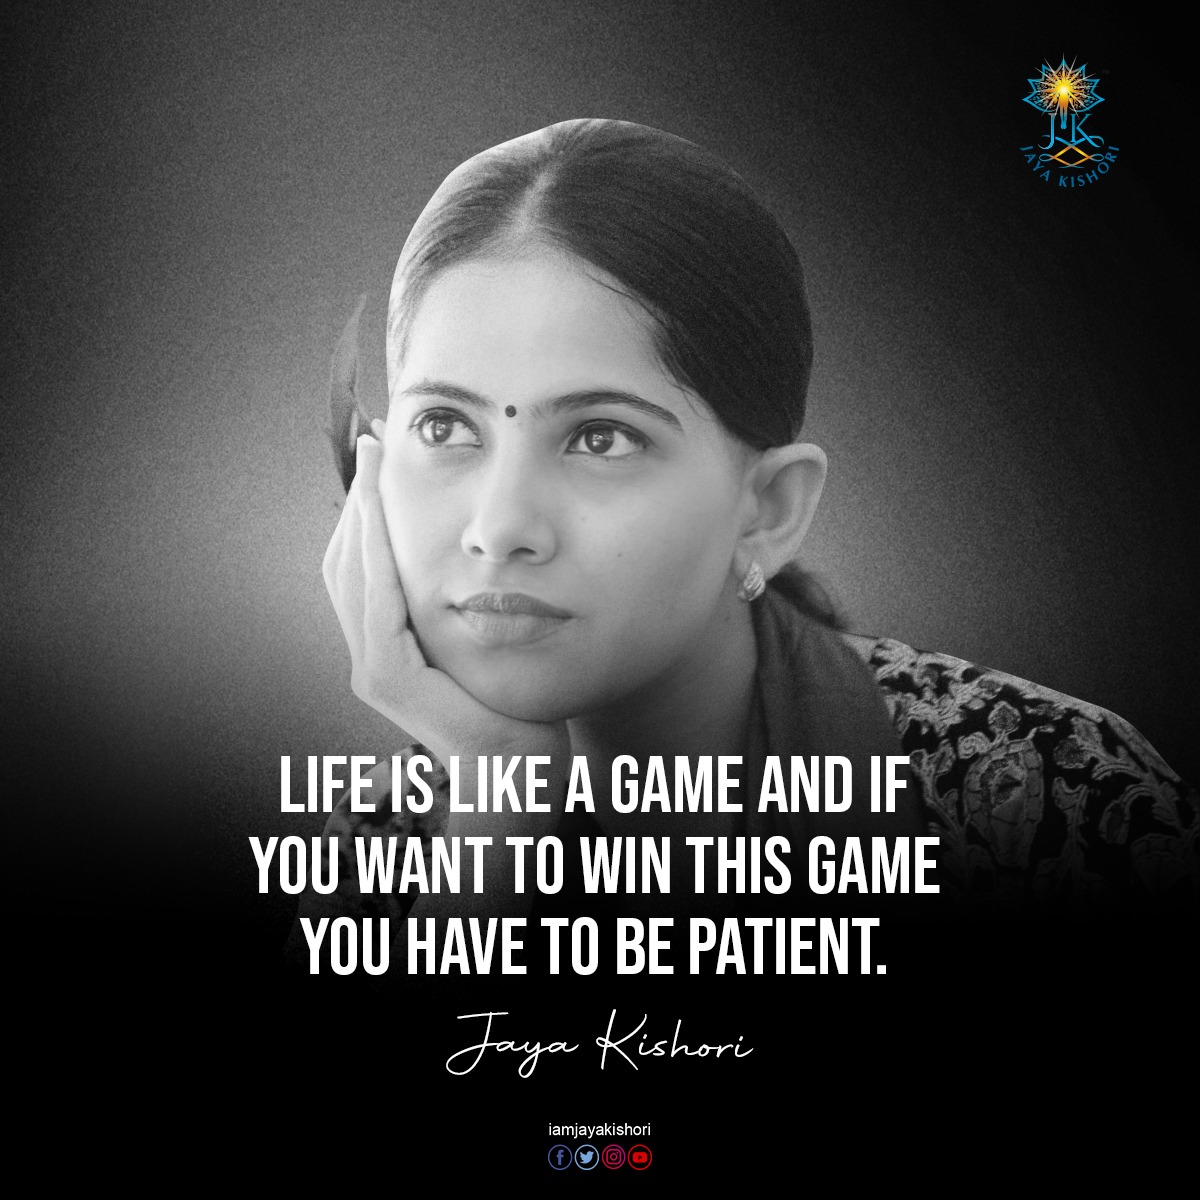 Jaya Kishori on X: Life is like a game and if you want to win this game  you have to be patient. #iamjayakishori #quotes #quoteoftheday #motivation  #dailymotivation #dailyquotes #inspiration #game #win #patient